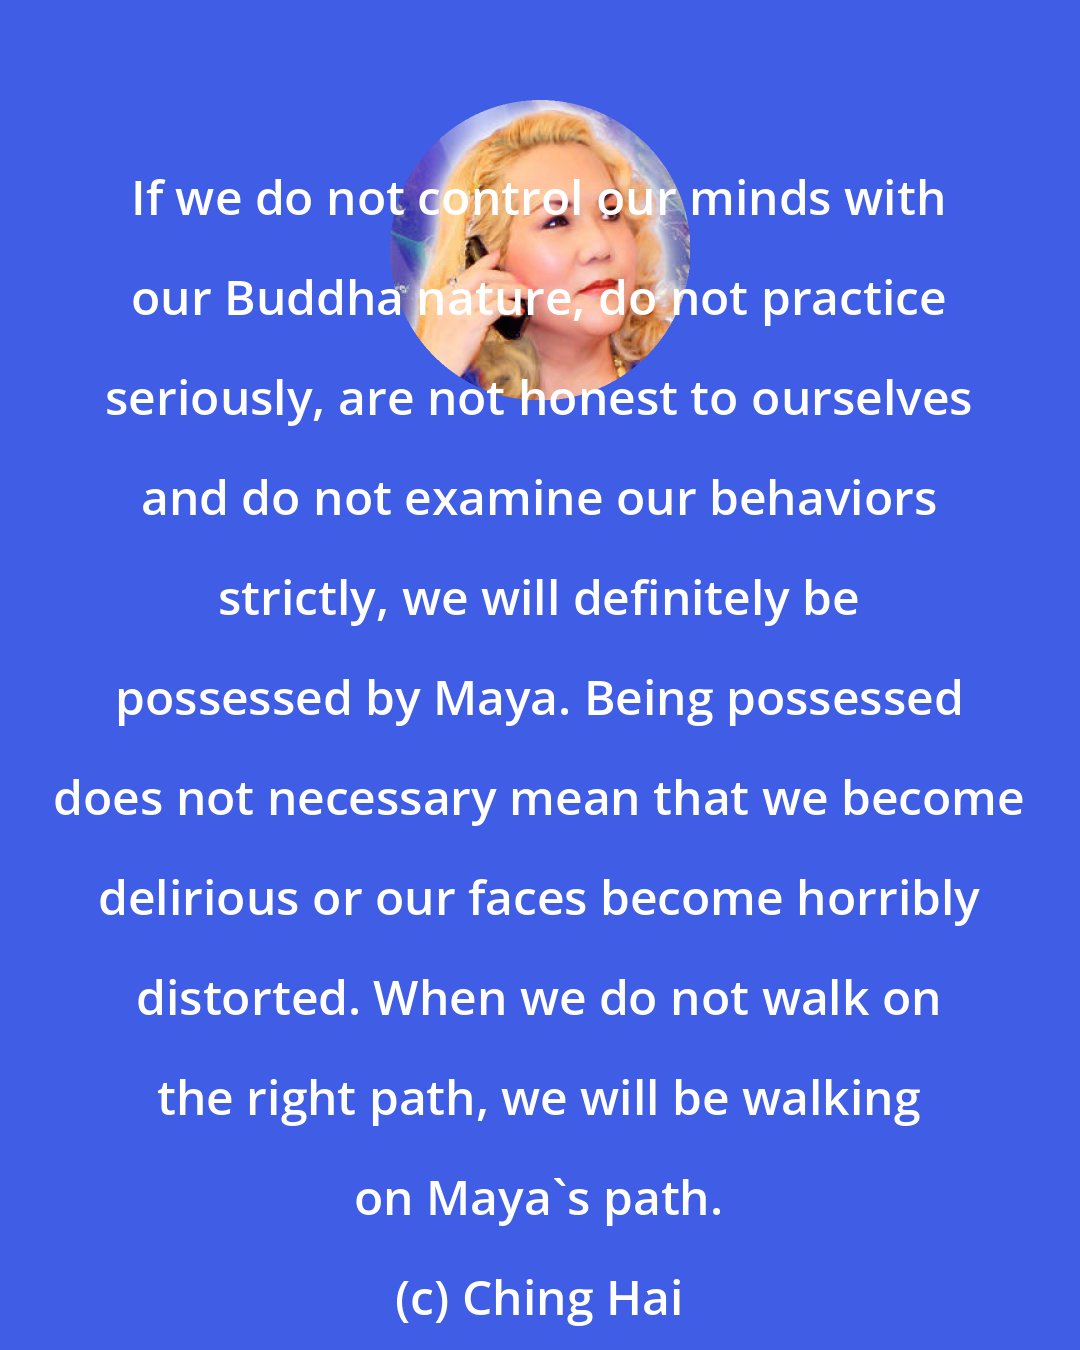 Ching Hai: If we do not control our minds with our Buddha nature, do not practice seriously, are not honest to ourselves and do not examine our behaviors strictly, we will definitely be possessed by Maya. Being possessed does not necessary mean that we become delirious or our faces become horribly distorted. When we do not walk on the right path, we will be walking on Maya's path.